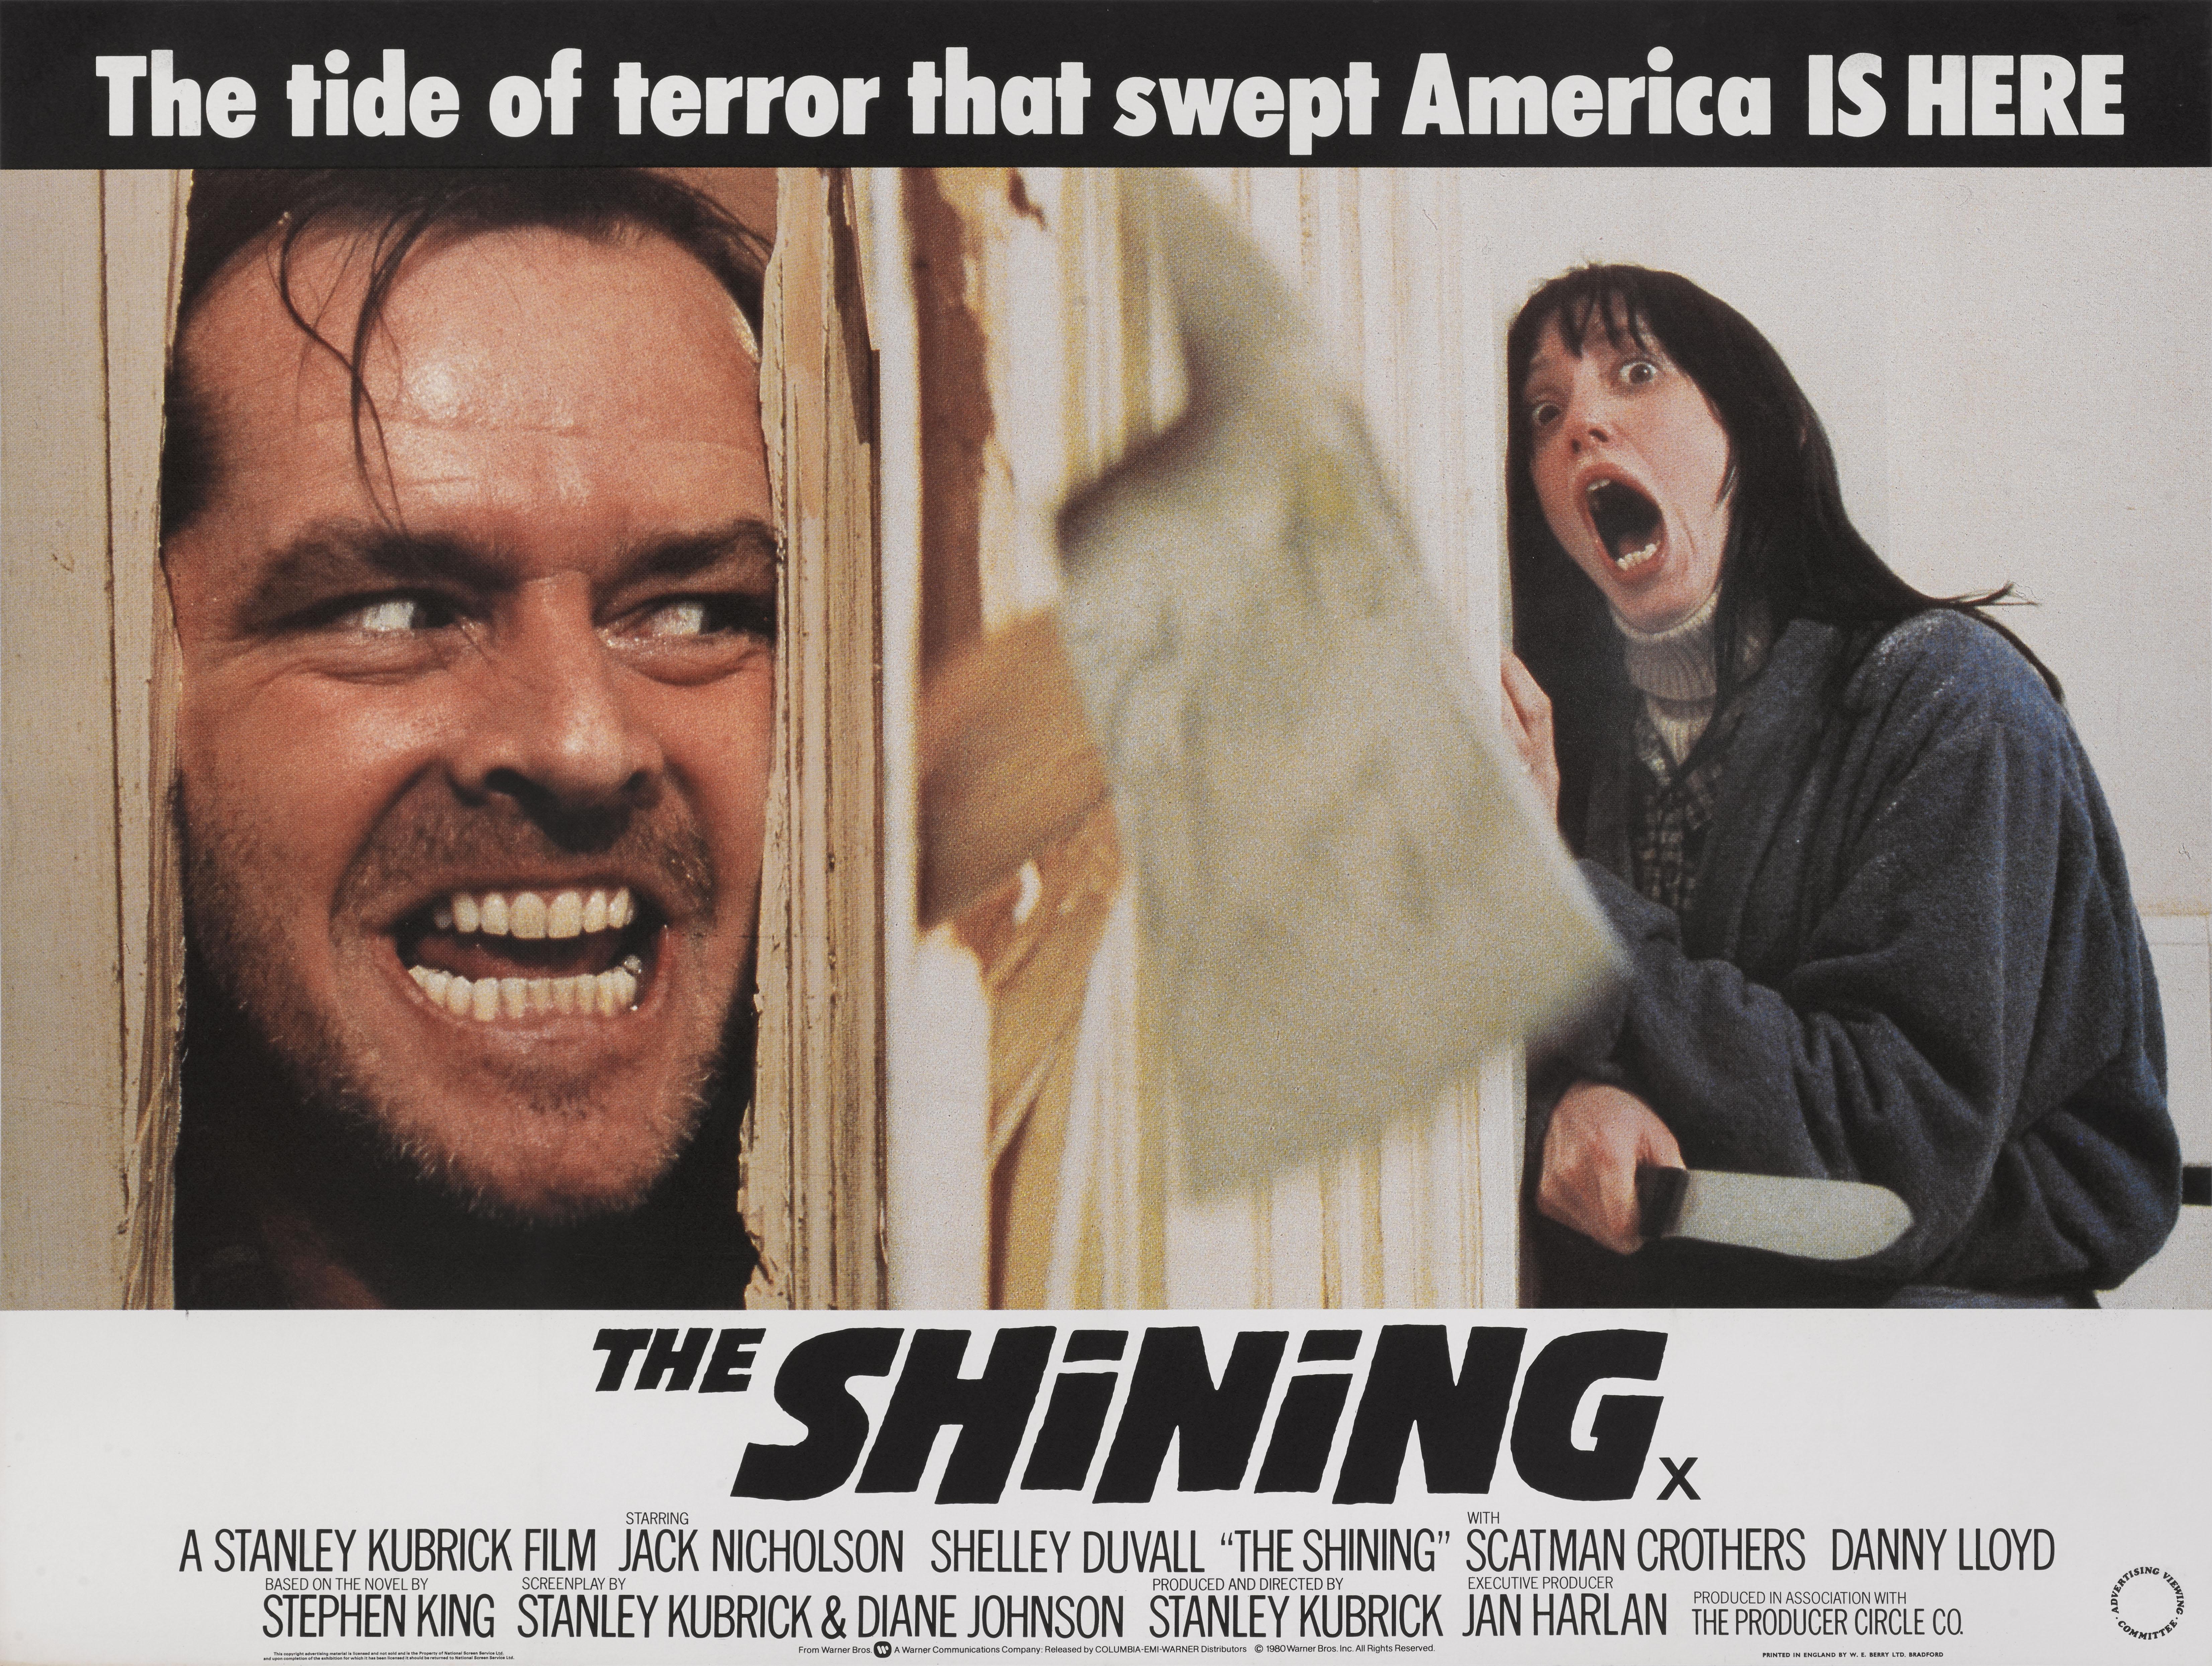 Original British film poster for The Shining 1980.
This chilling horror was directed by Stanley Kubrick, and stars Jack Nicholson, Shelley Duvall and Danny Lloyd. Nicholson gave a incredible performance as Jack Torrance, who with his family agreed